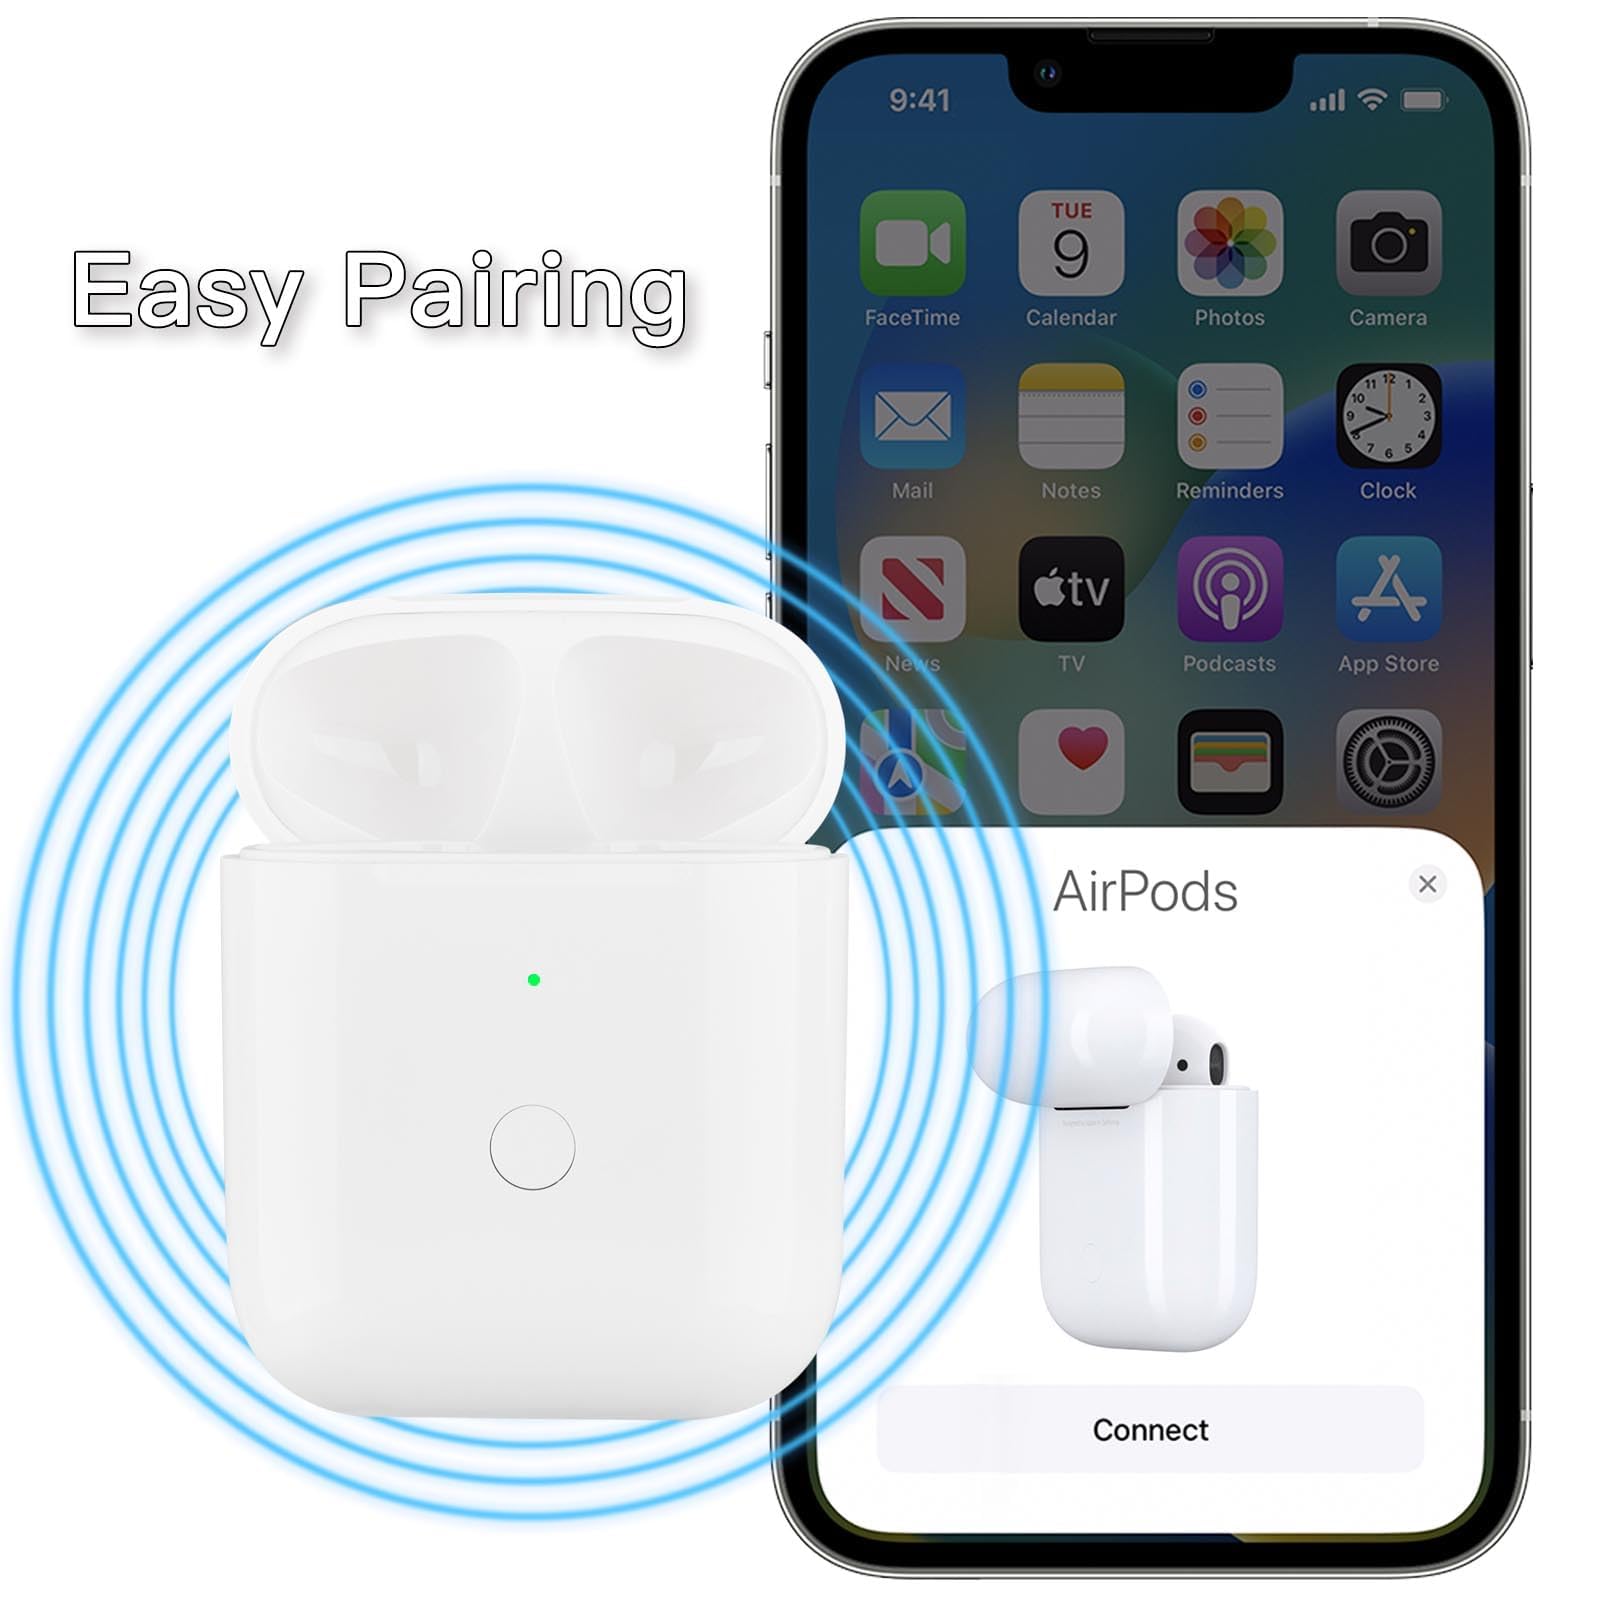 OLEBAND Replacement Airpods 2 and 1 Charging Case,Easy to Pair Your Air pods 1st and 2nd Generation Earbuds with Pairing Button,Support Wired and Wireless Charging,iPods Gen 2 and 1,1 Year Warranty